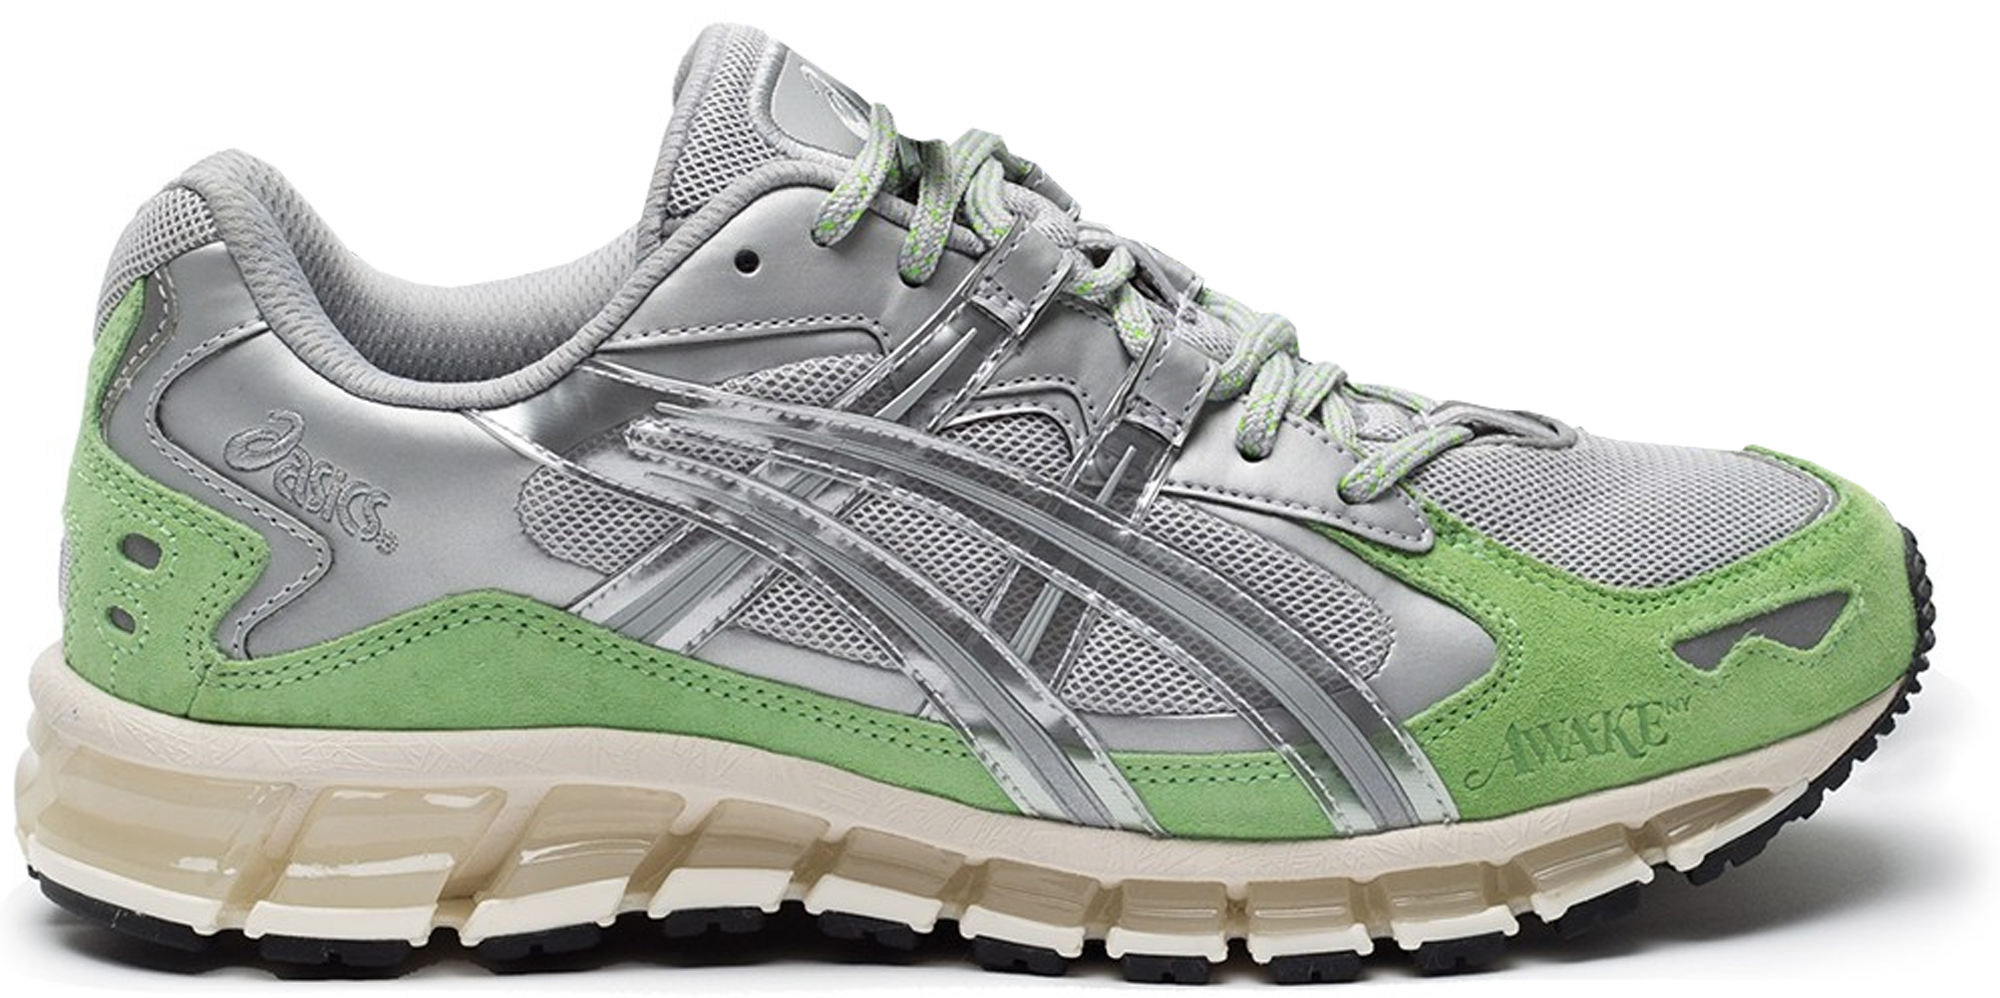 asics silver shoes